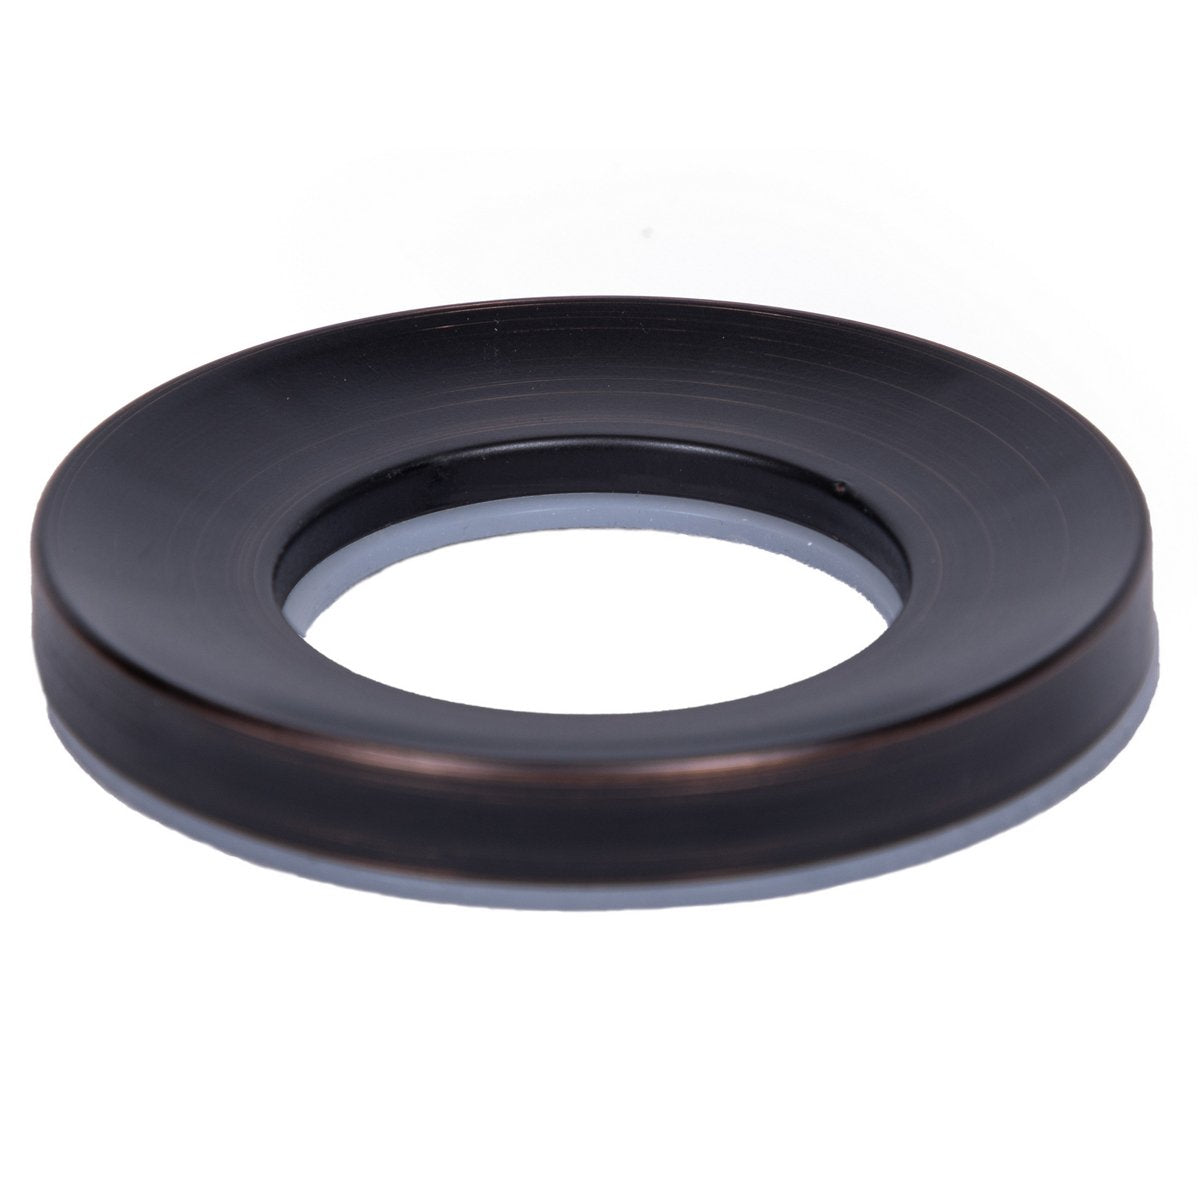 Eden Bath 1.5" Popup Drain and Mounting Ring